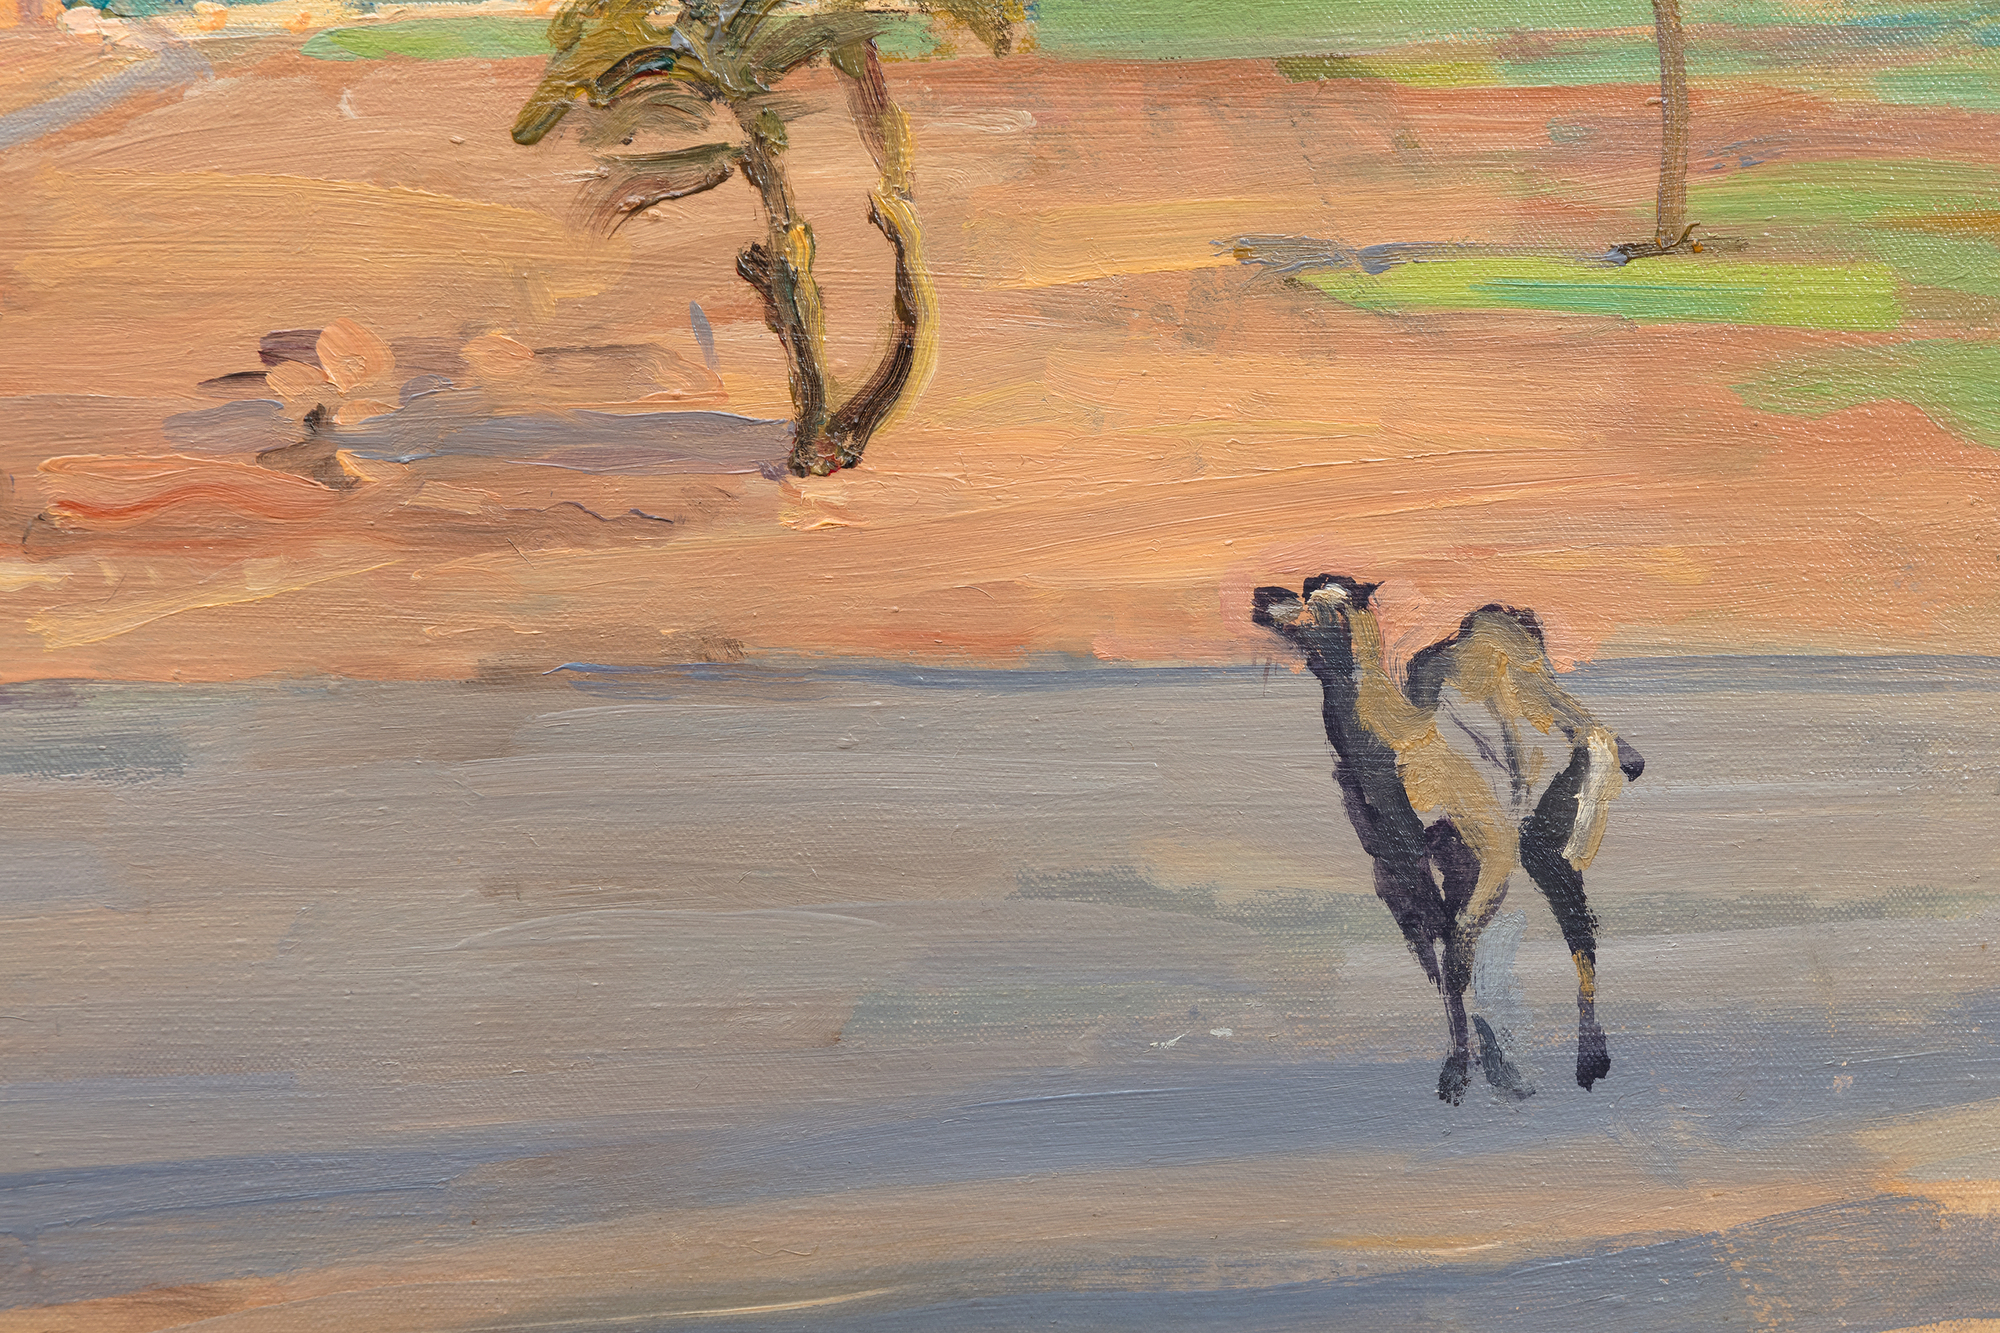 An outstanding example of Churchill’s North African scenes, one in which he deftly captures the scenery and light that his artistic mentor, John Lavery, had told him about in the mid 1930s.  Another artist mentor, Walter Sickert, taught Churchill how to project photo images directly on to a canvas as an aid in painting, a technique used to advantage in this instance.  The Studio Archives at Chartwell include 5 photographs, one of the camel and four others, that Churchill used as aids.&lt;br&gt;&lt;br&gt;With the visual aids, Churchill could focus on the vibrant colors, the tan of the sand and buildings contrasting with the brilliant blue skies, splashes of green adding energy to the painting. A different Marrakech scene, “Tower of the Koutoubia Mosque”, set an auction record for Churchill when it sold in 2021 for $11 million USD.